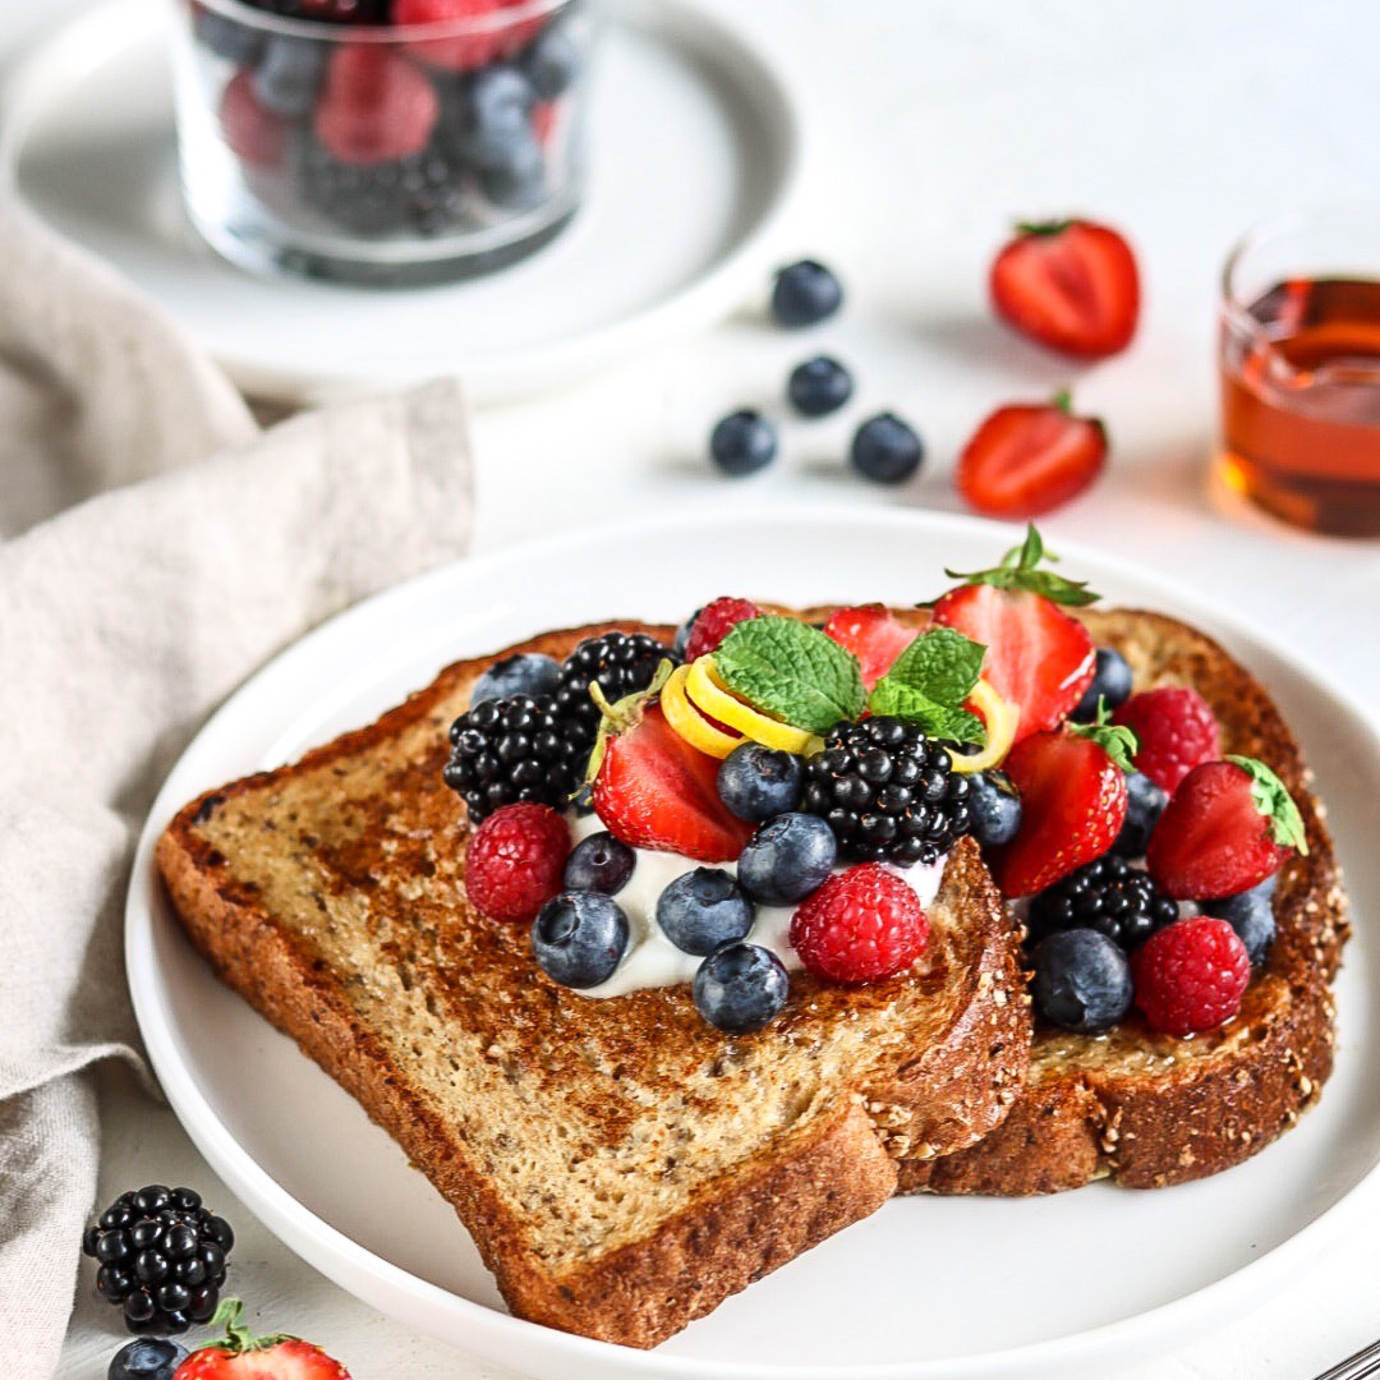 French Toast with Lemon and Berries